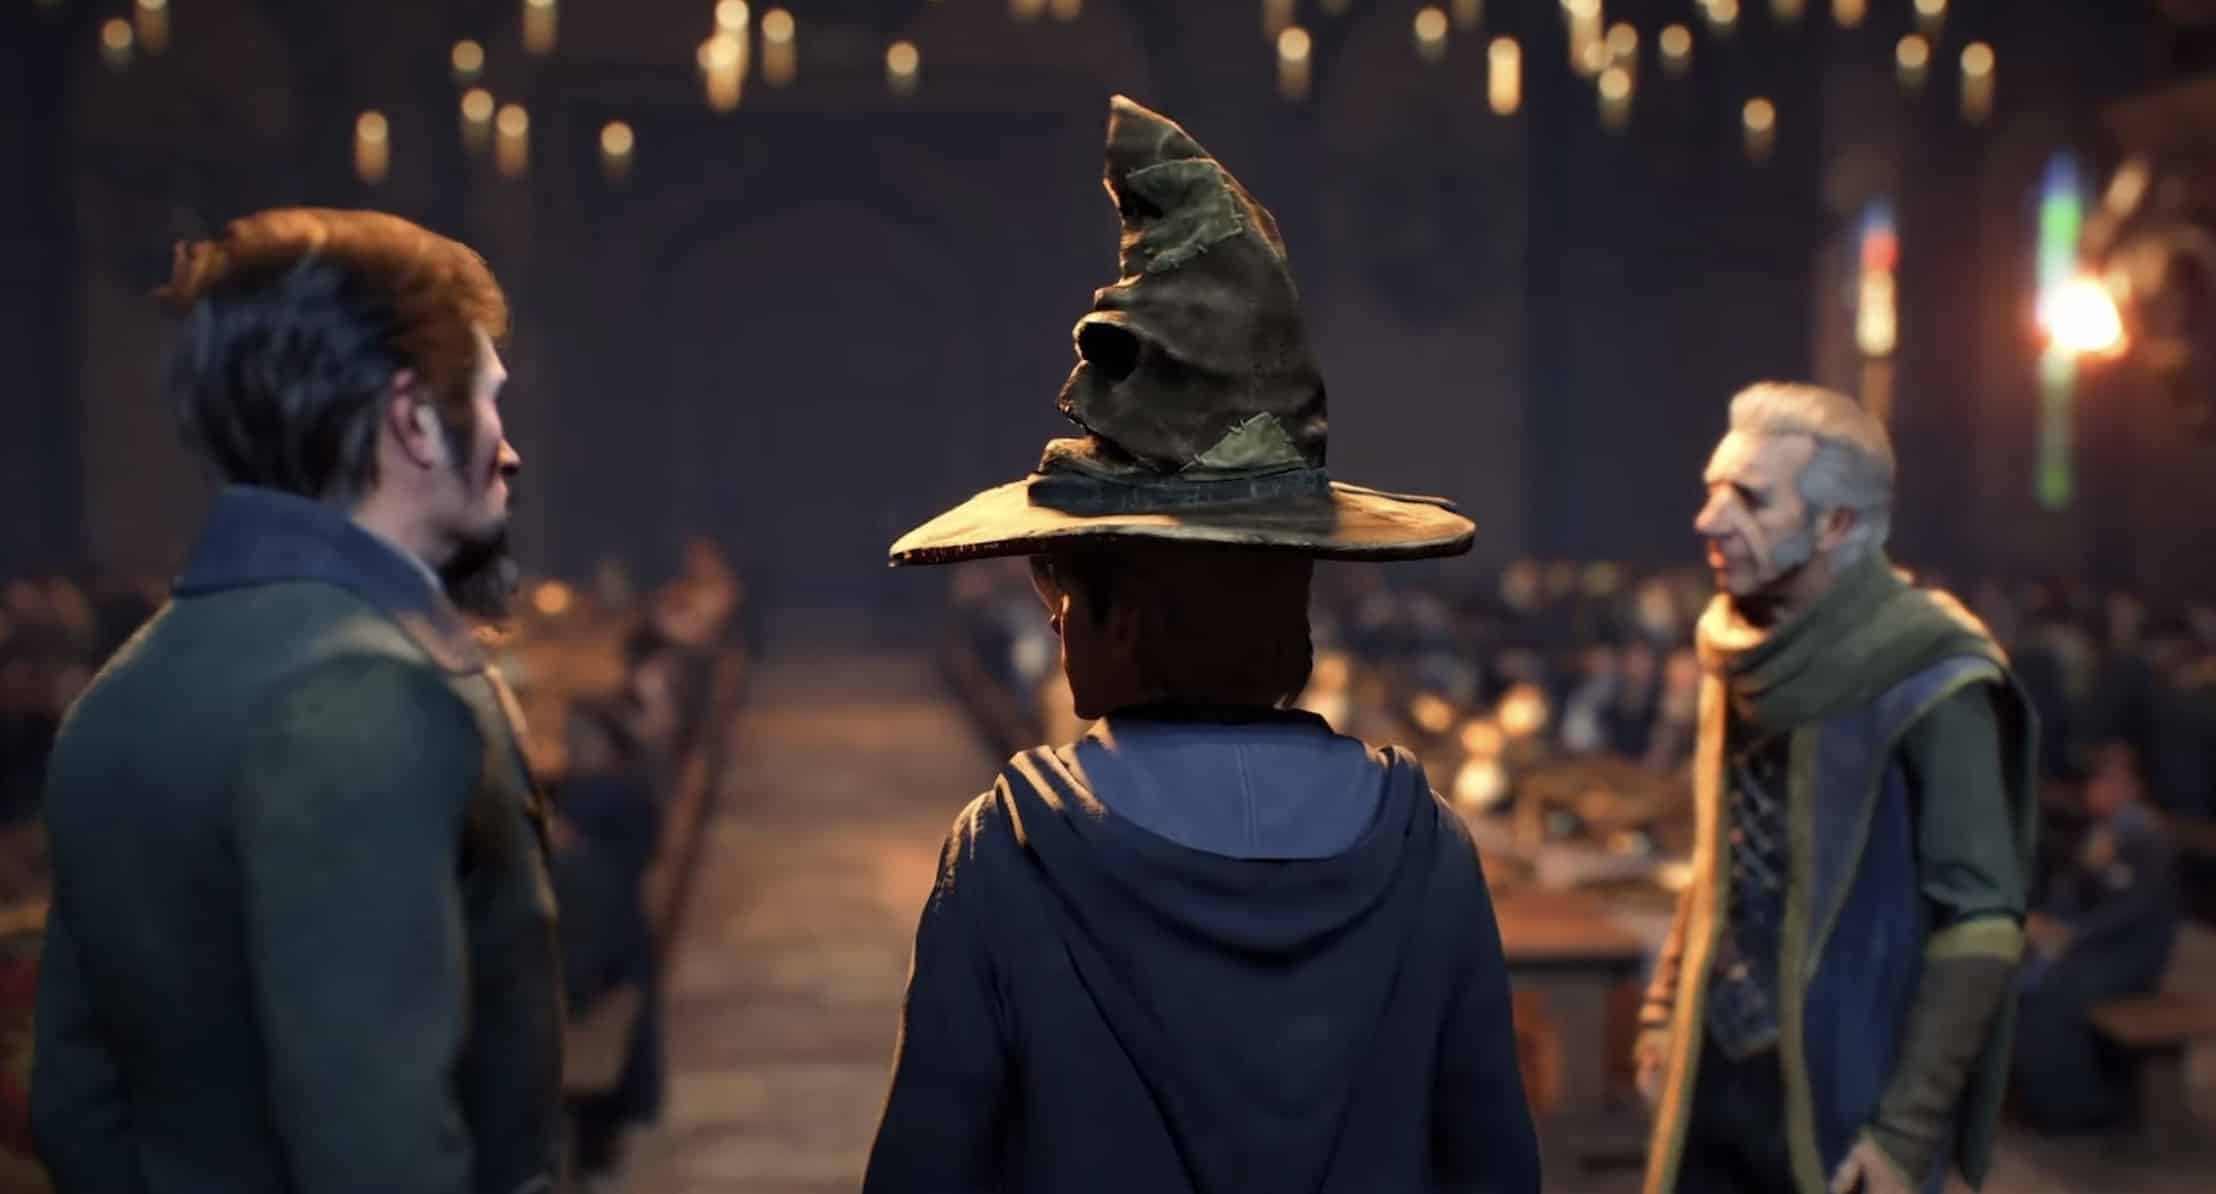 Hogwarts Legacy gameplay video confirms a holiday 2022 release window